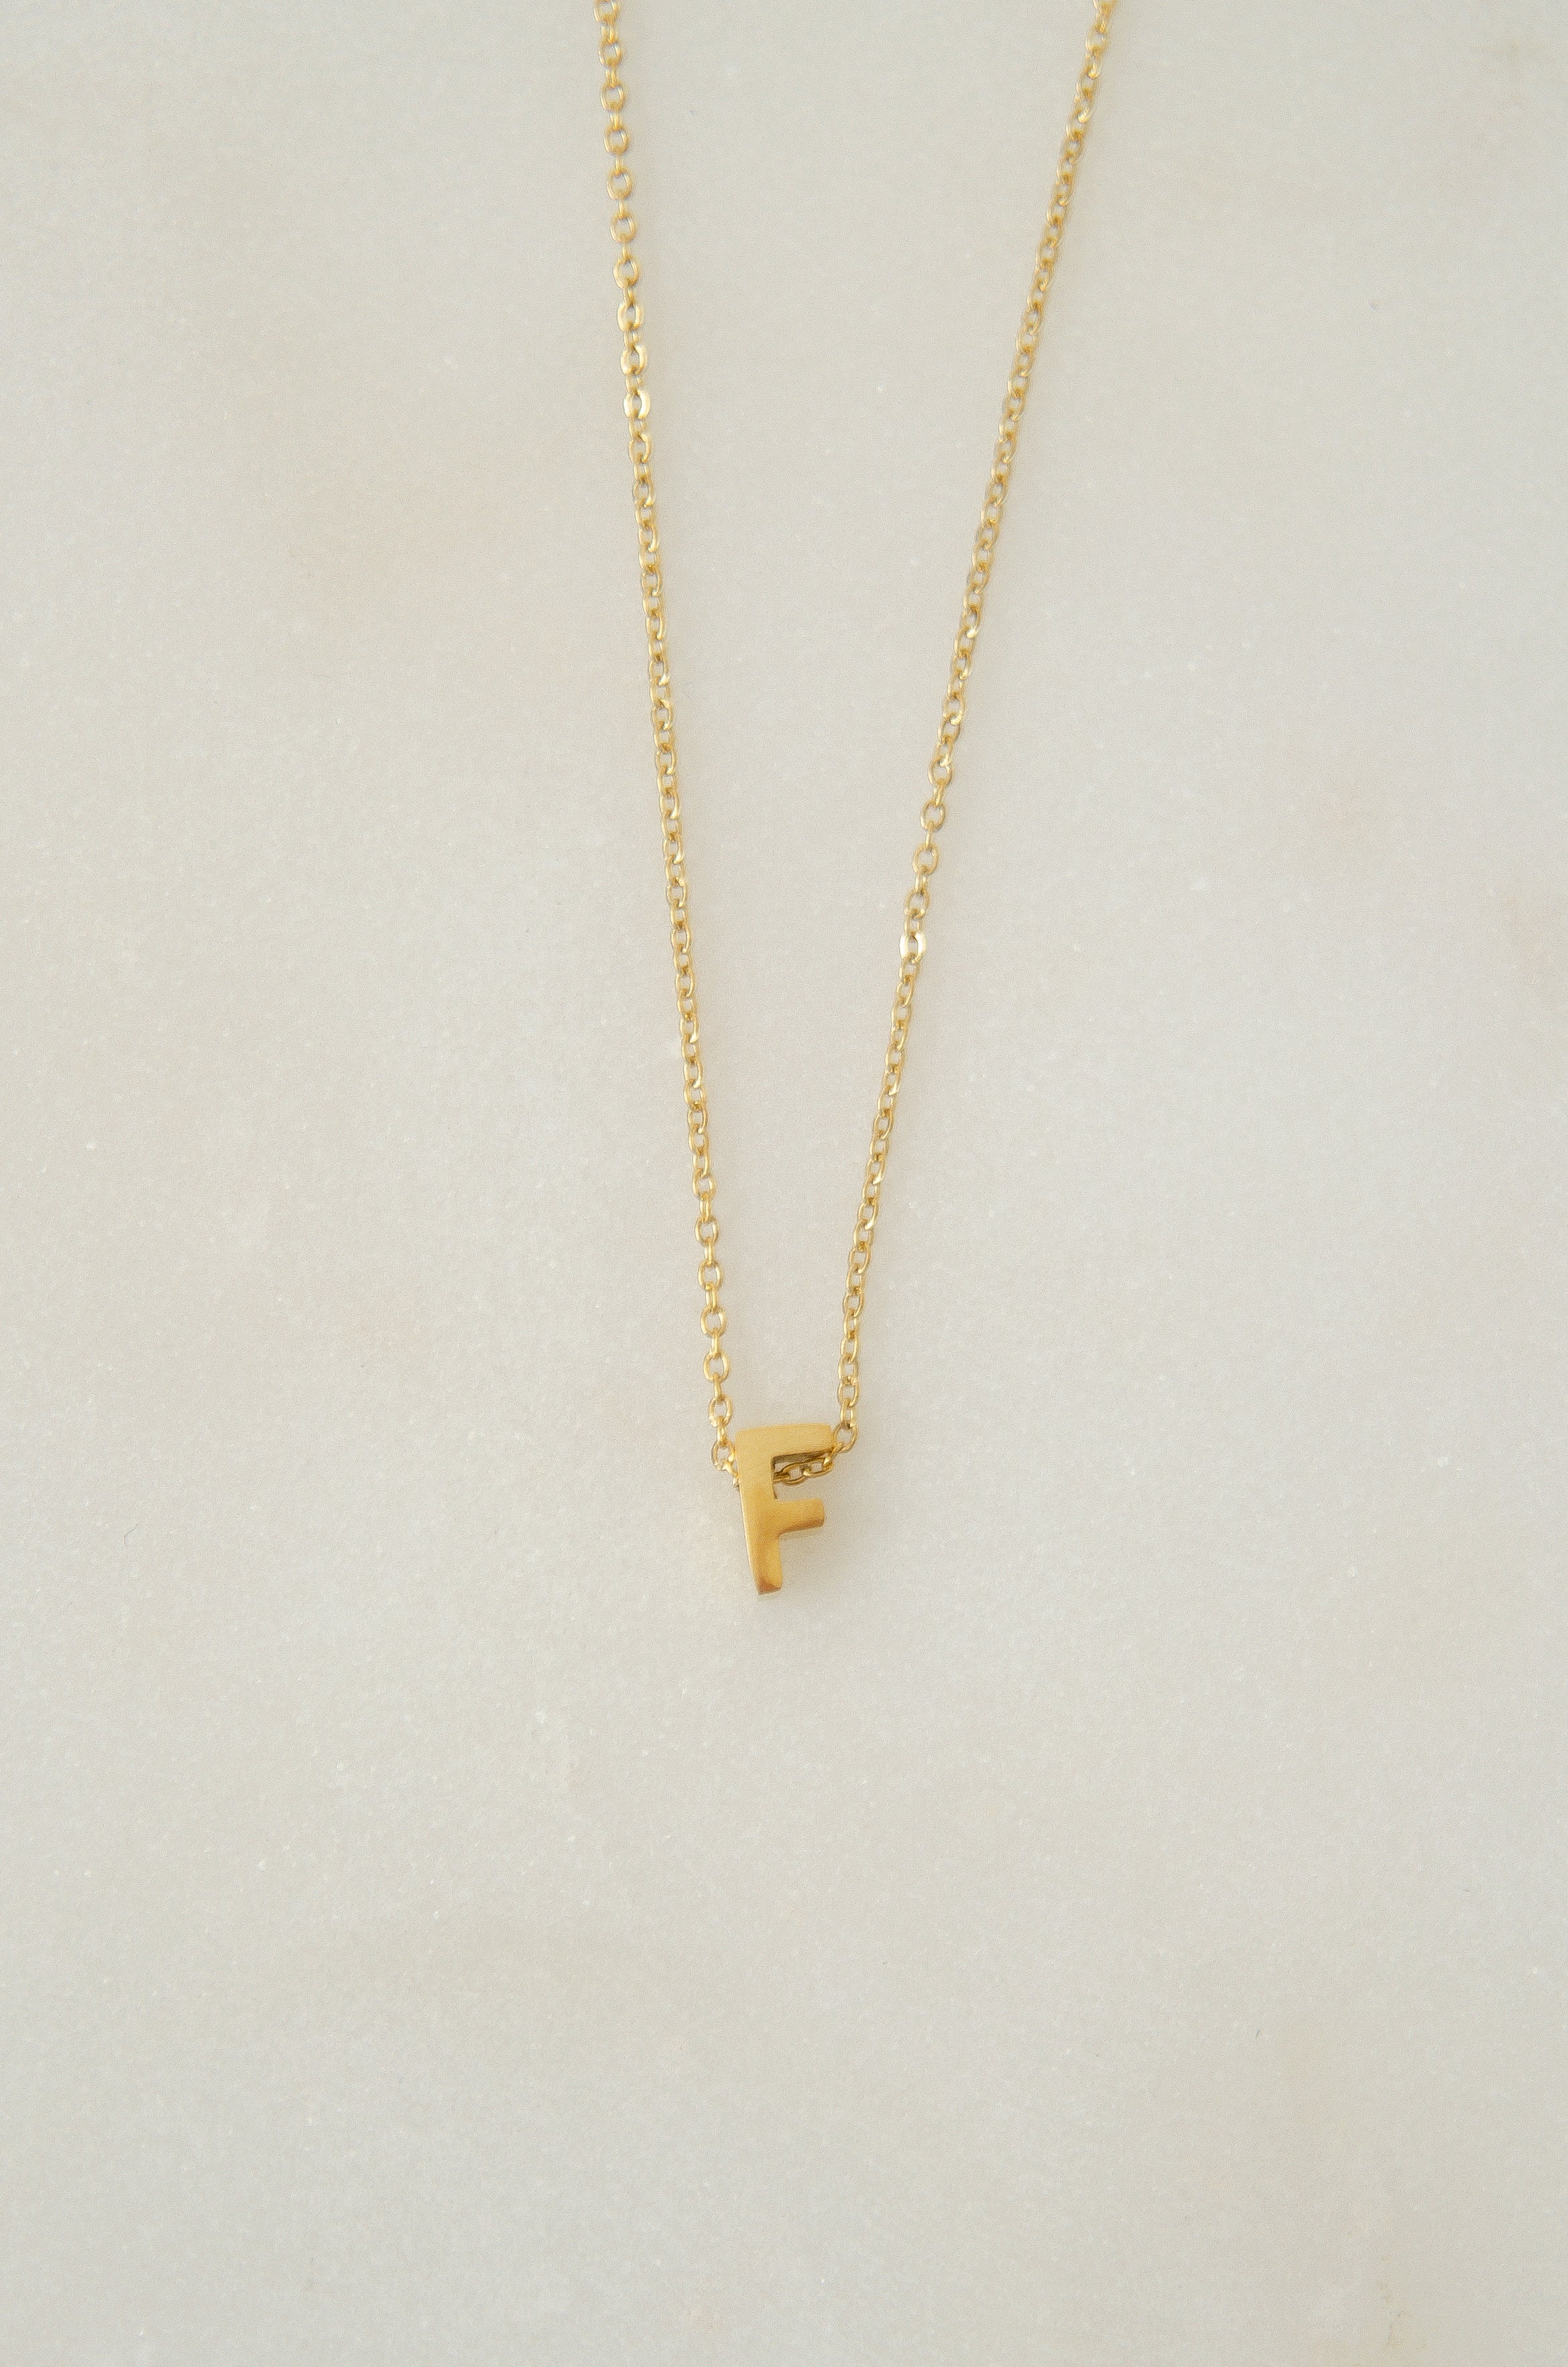 LETTERS NECKLACE // F